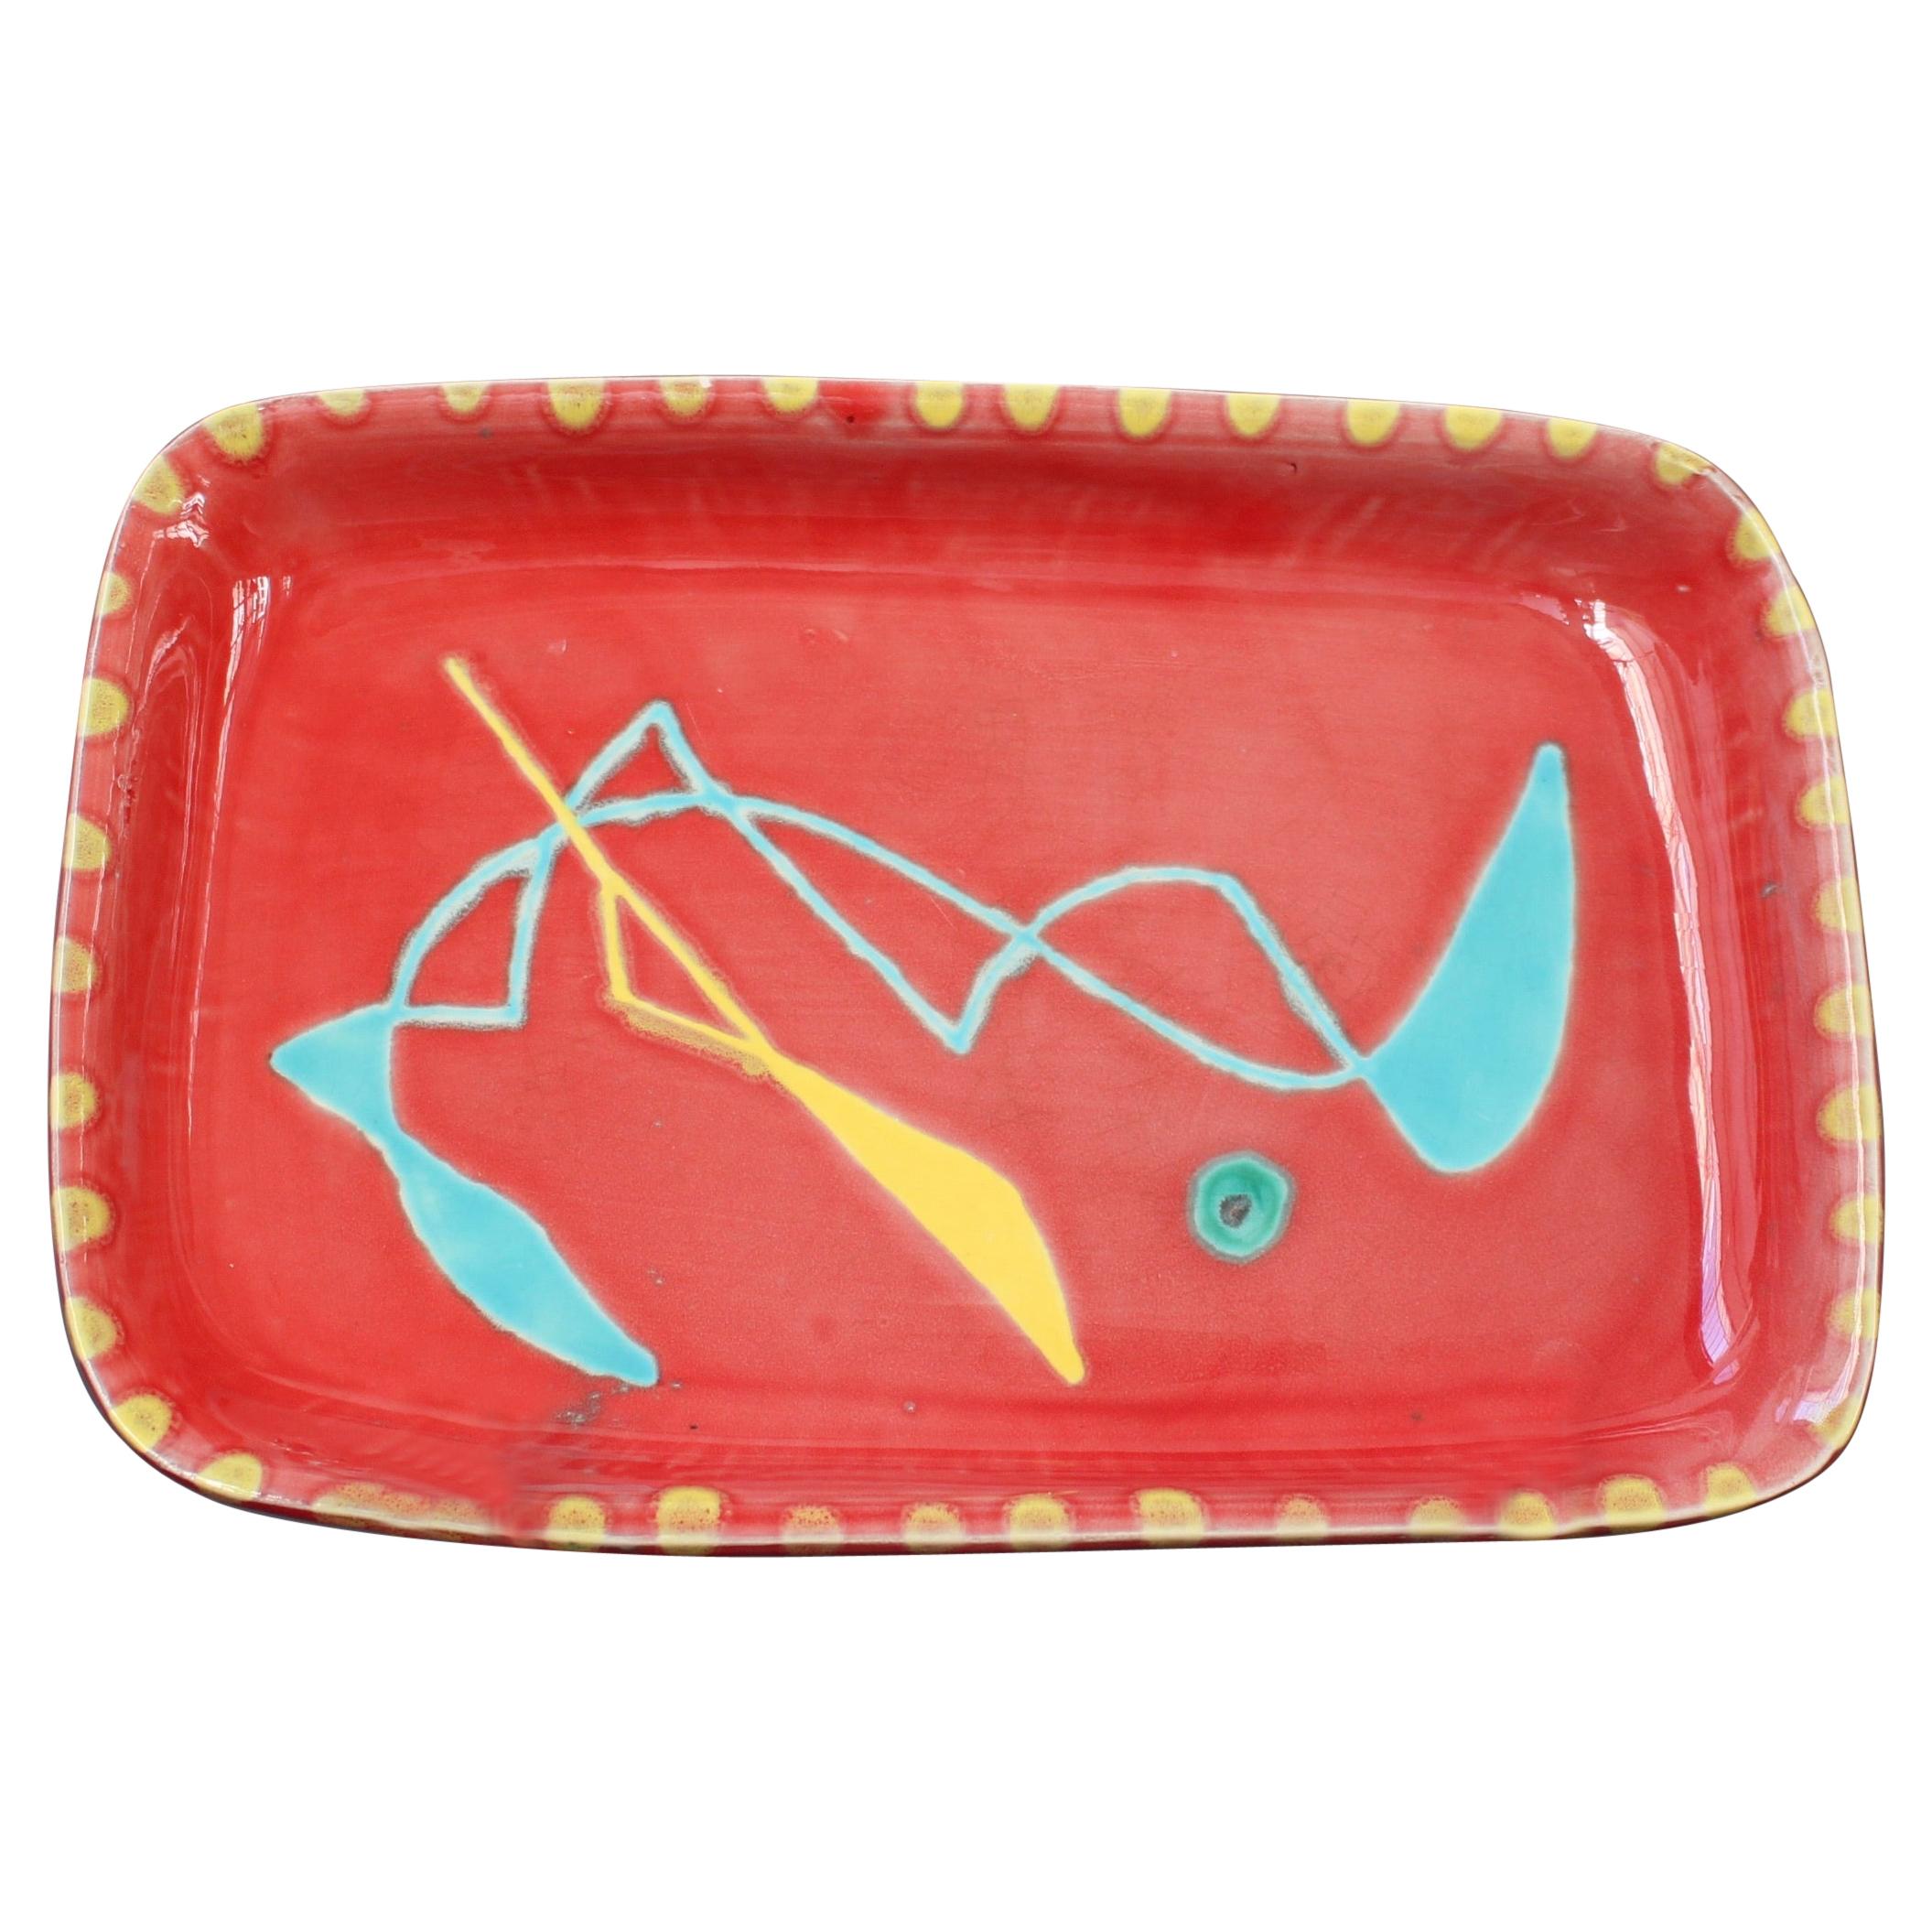 Belgian Ceramic Tray For Sale at 1stDibs